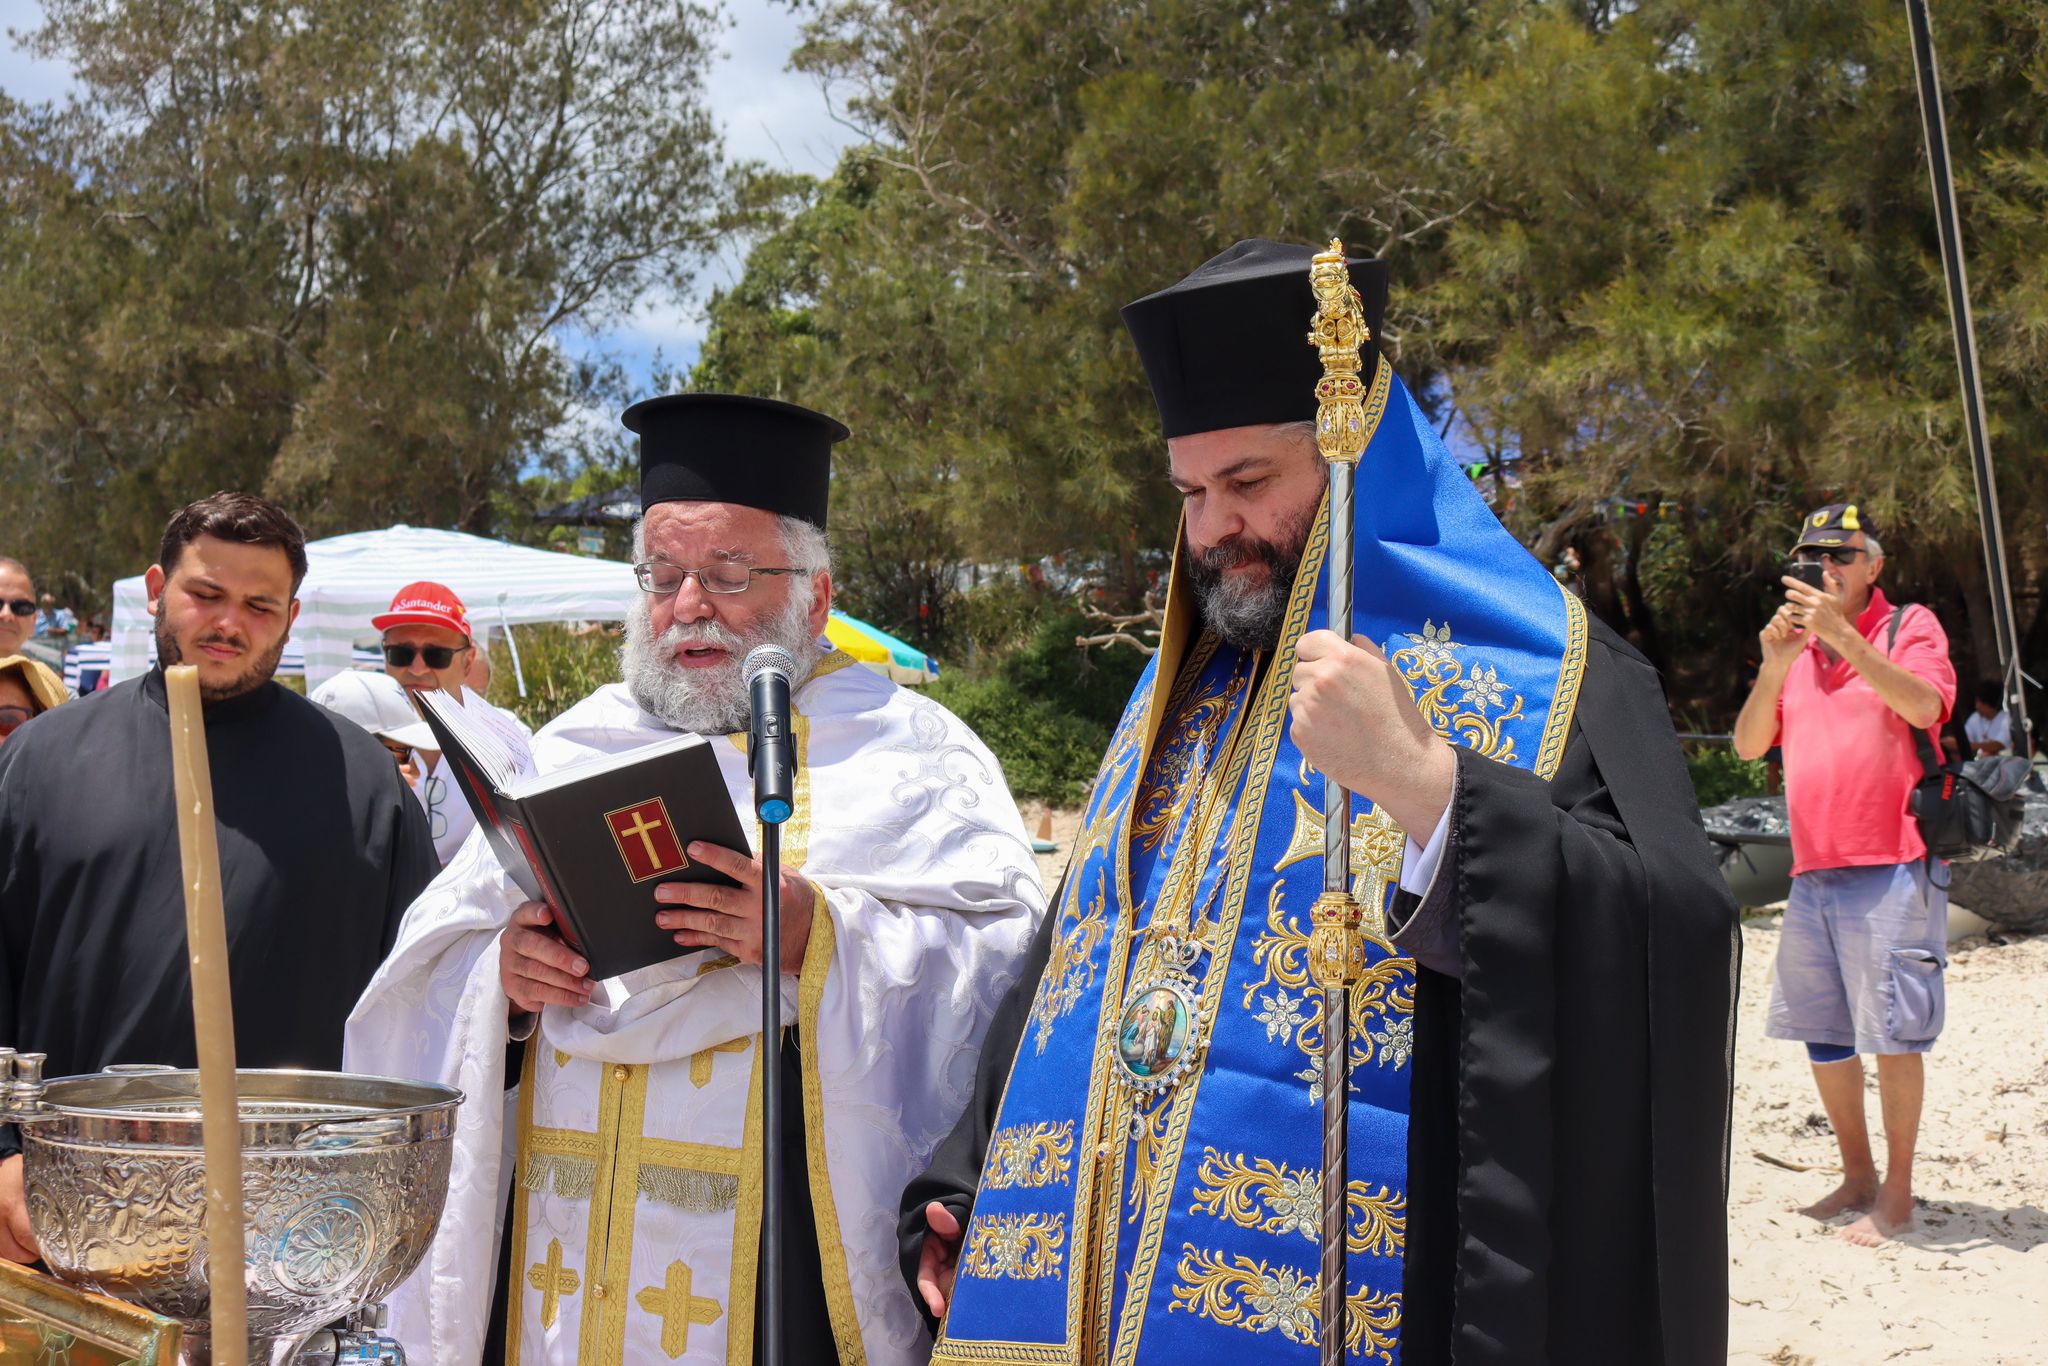 Epiphany Feast Day at the Church of Saint John in Jervis Bay